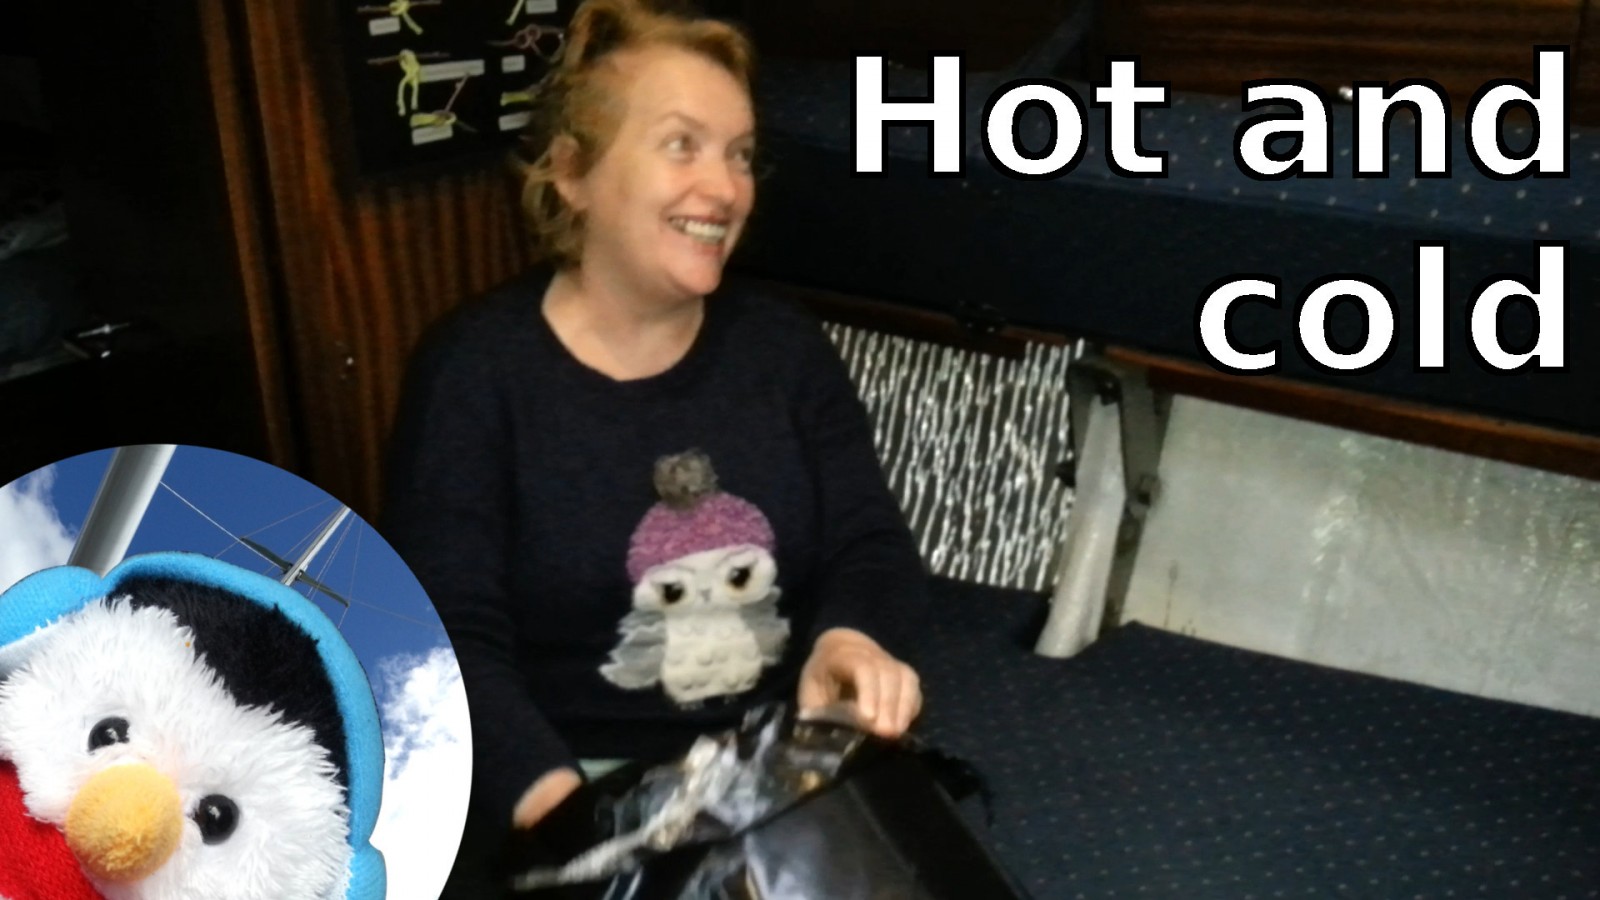 Watch our 'Hot and Cold' video and add comments